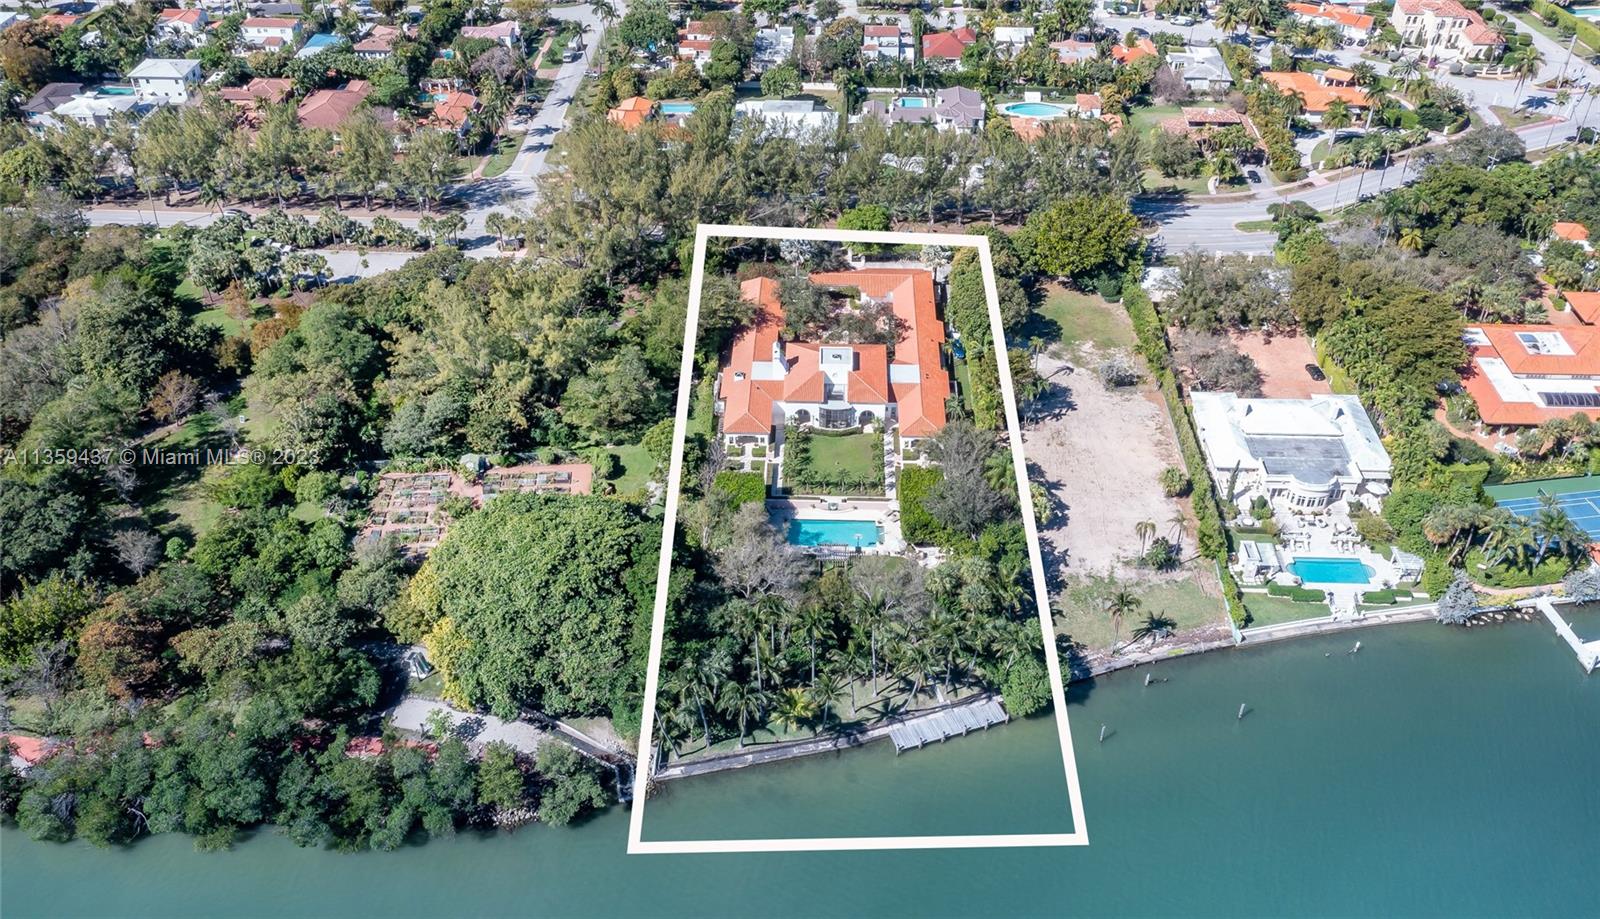 Nestled on a sprawling 1.3-acre waterfront lot, this magnificent Miami Beach property offers endless possibilities. Featuring 6 spacious bedrooms. 7.5 bathrooms, 40 ft dock and 3 car garage, , this home boasts over 12,359 total square feet of living space. The home is situated on a vast 58,650 square foot lot with spectacular water views, providing a serene and tranquil oasis. The property offers exceptional potential for outdoor living and entertaining. This one of a kind property presents a rare opportunity for those seeking to create their dream waterfront estate in Miami Beach.